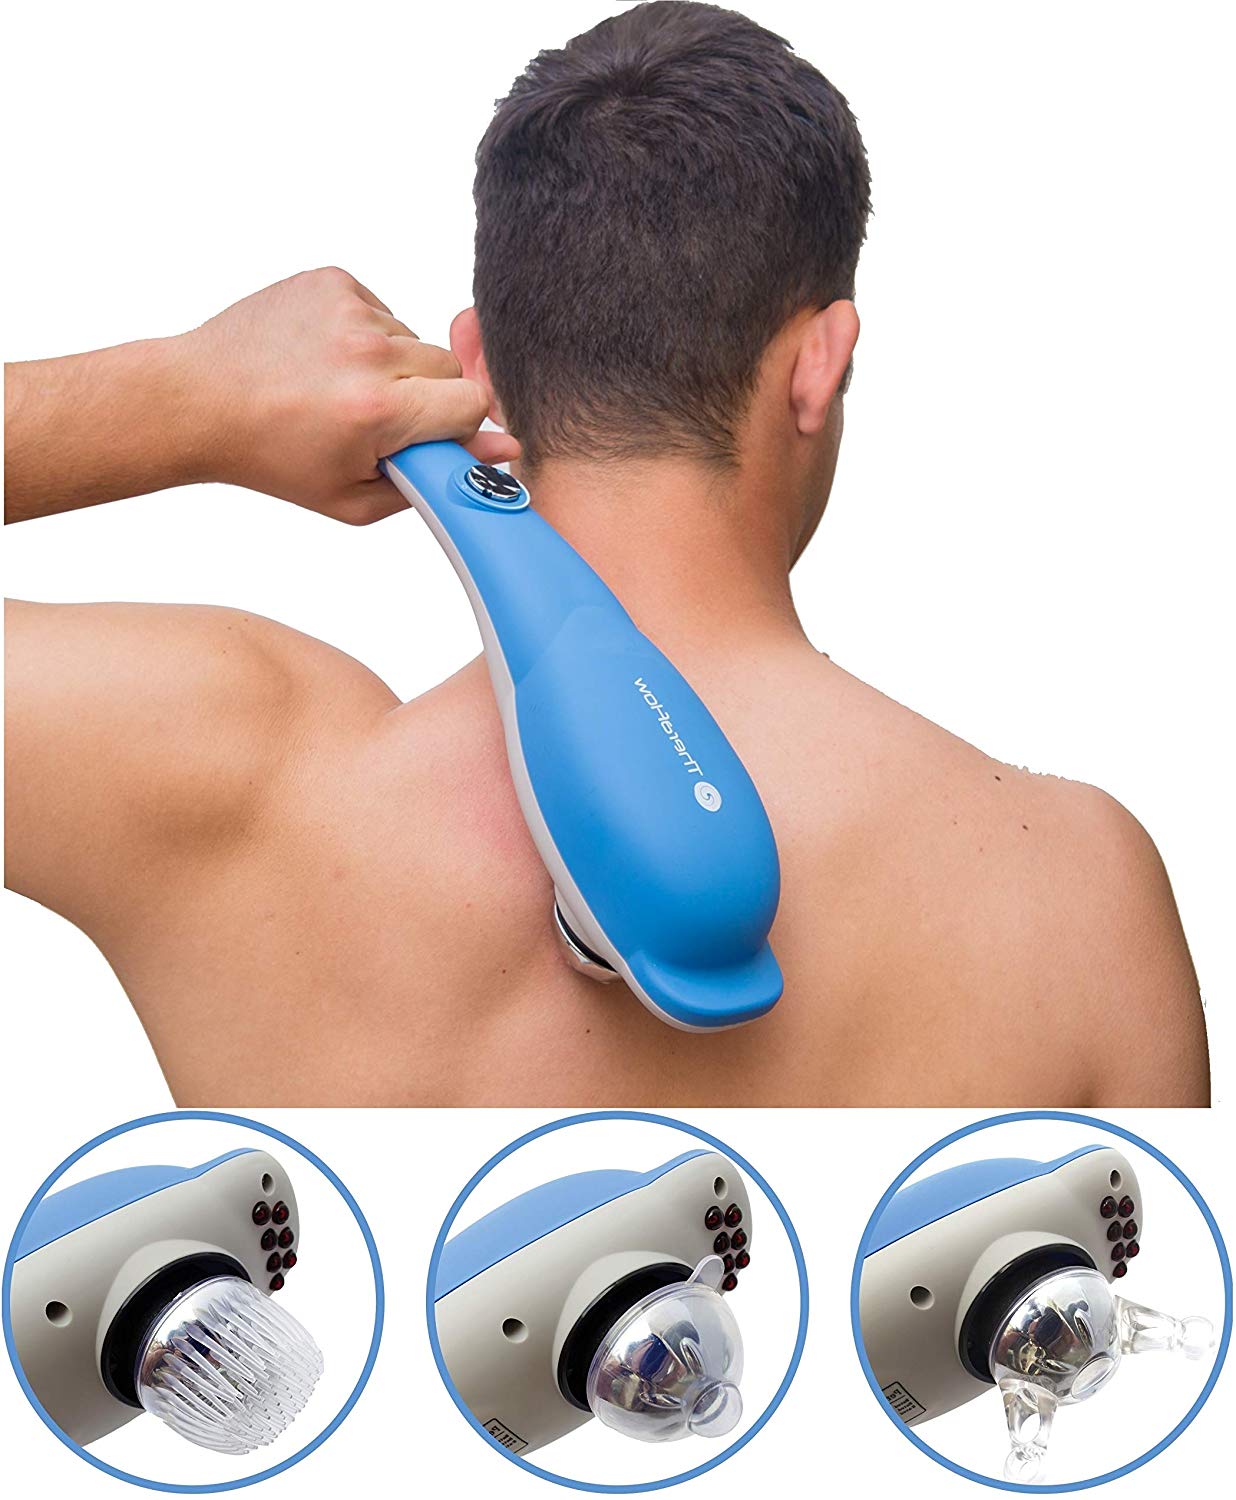 TheraFlow Handheld Deep Tissue Percussion Massager. Muscles, Back, Body, Neck, Foot, Shoulder, Scalp, Head. Trigger Point Pain Relief, Relaxation. Attachments for Acupoint, Shiatsu, Kneading. Gift